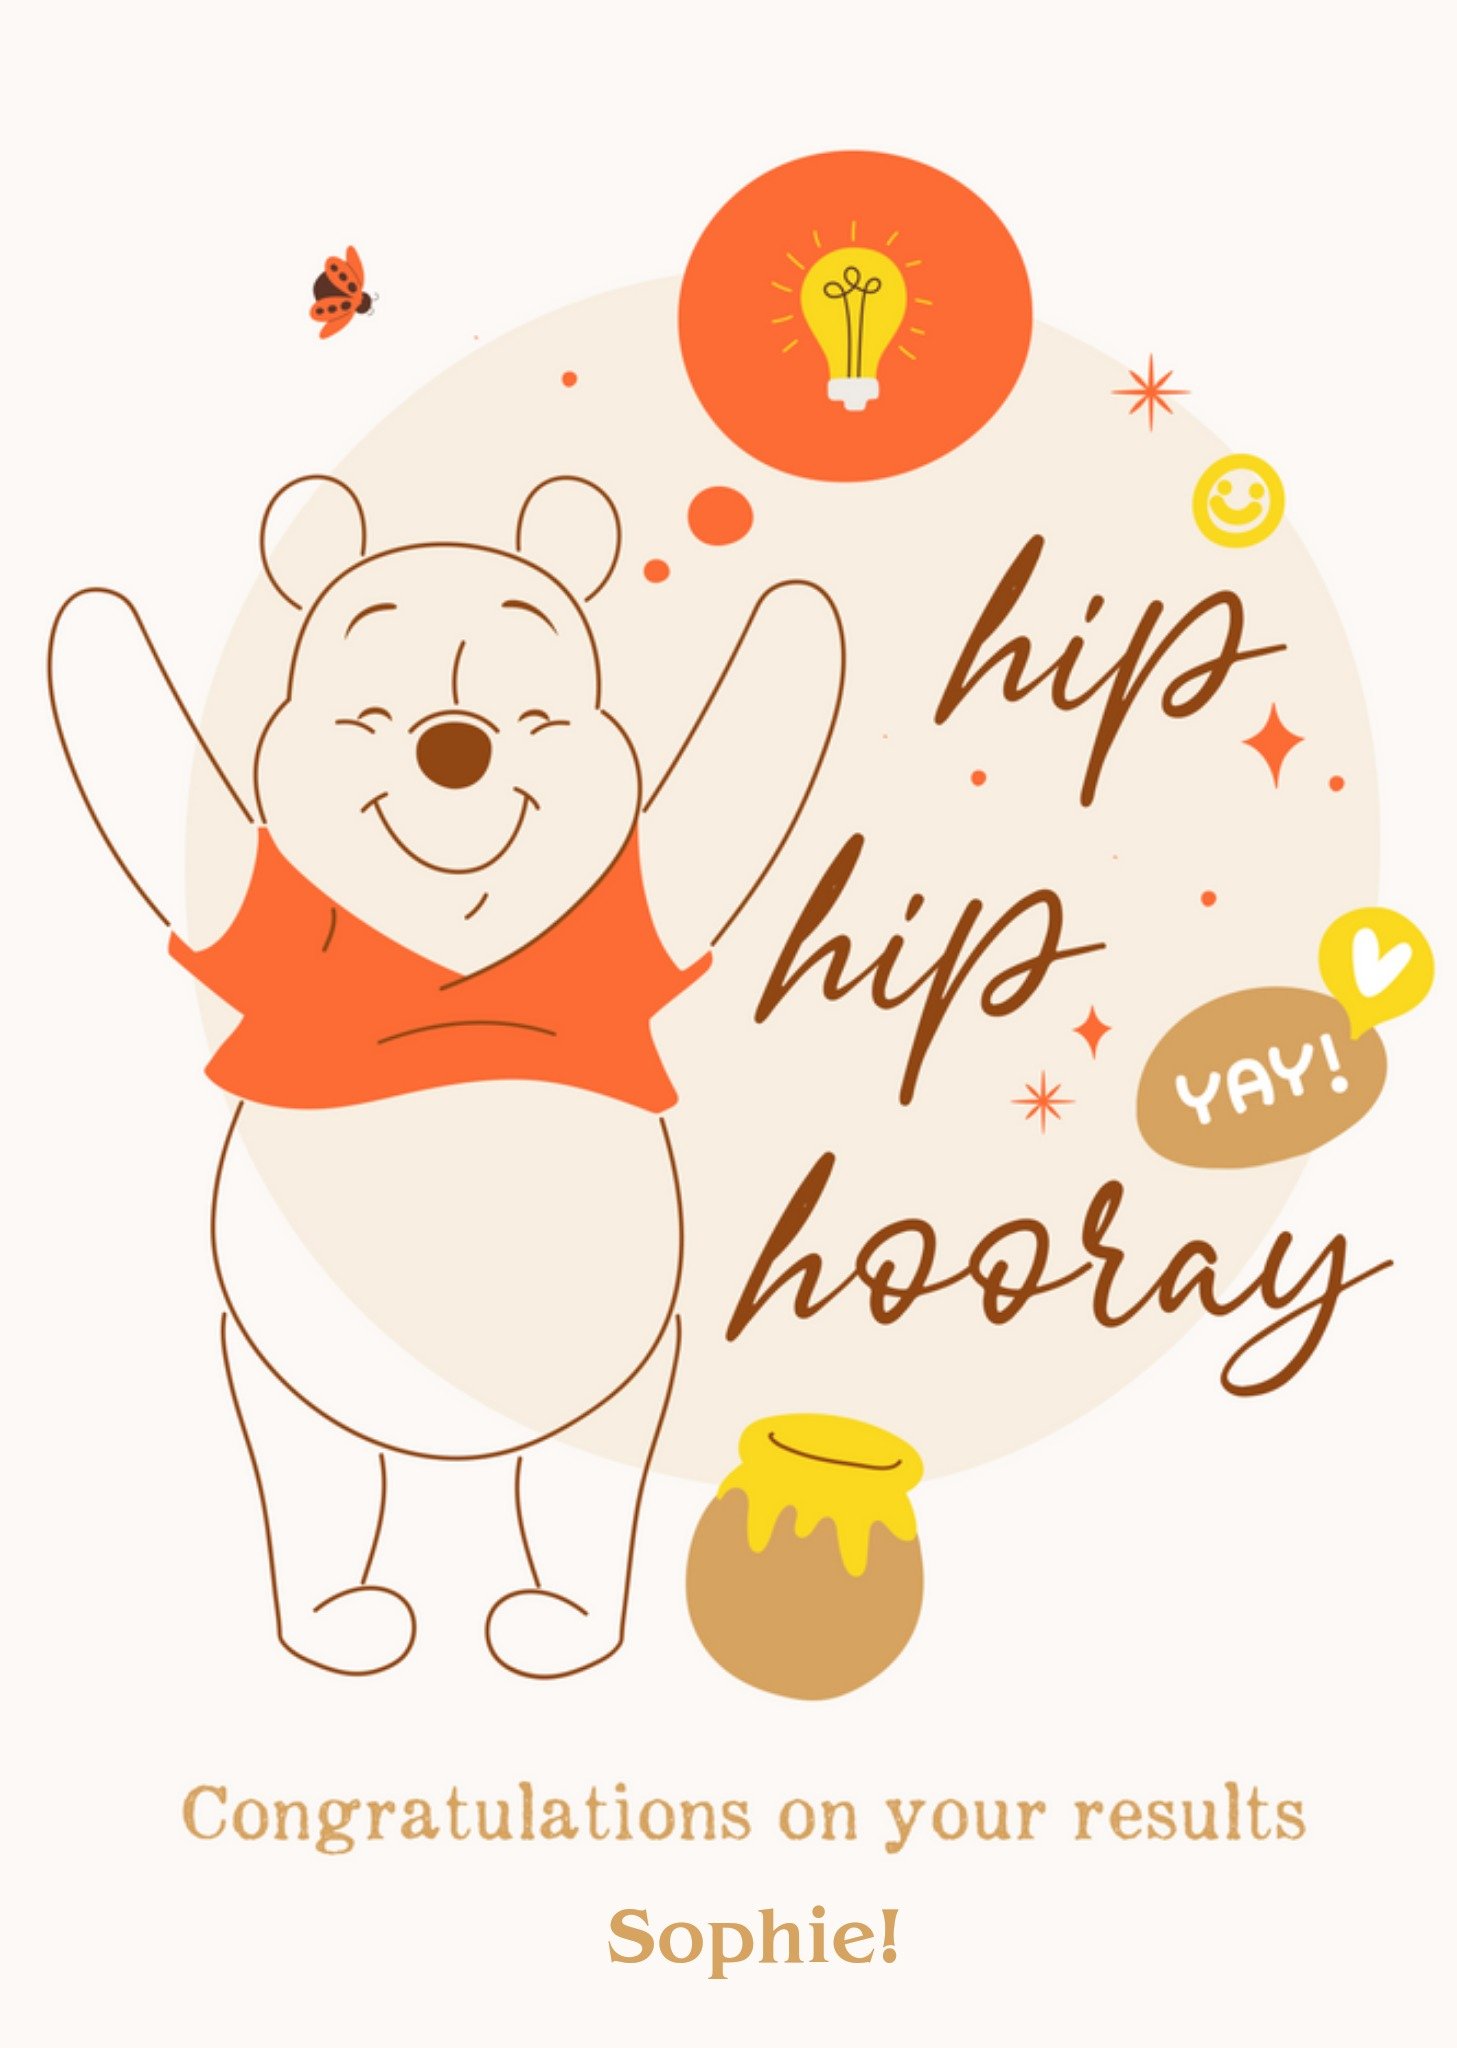 Disney Winnie The Pooh Hip Hip Hooray Congratulations On Your Results Card Ecard